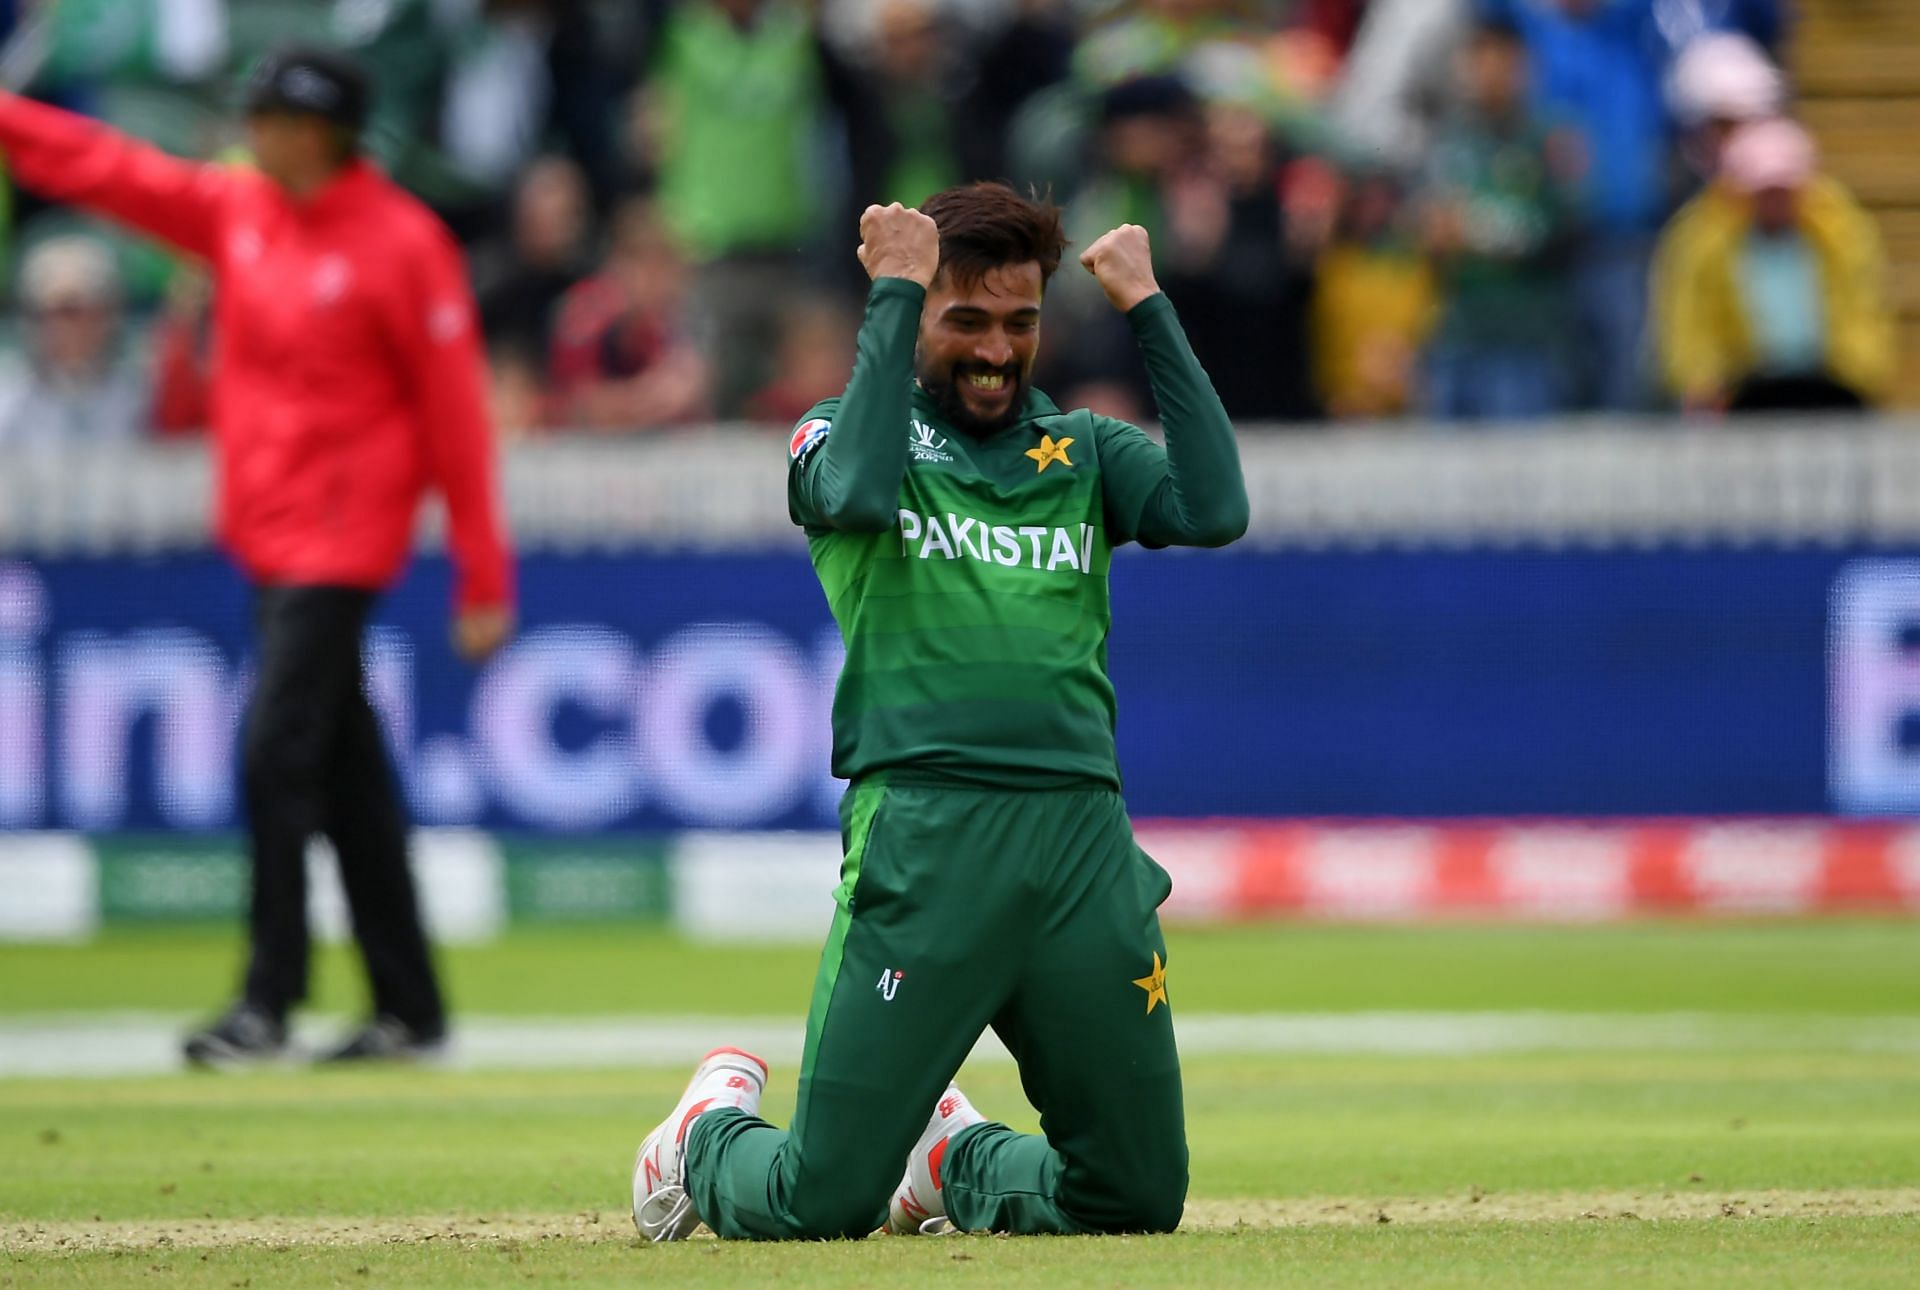 Mohammad Amir (Image Credits: Getty)